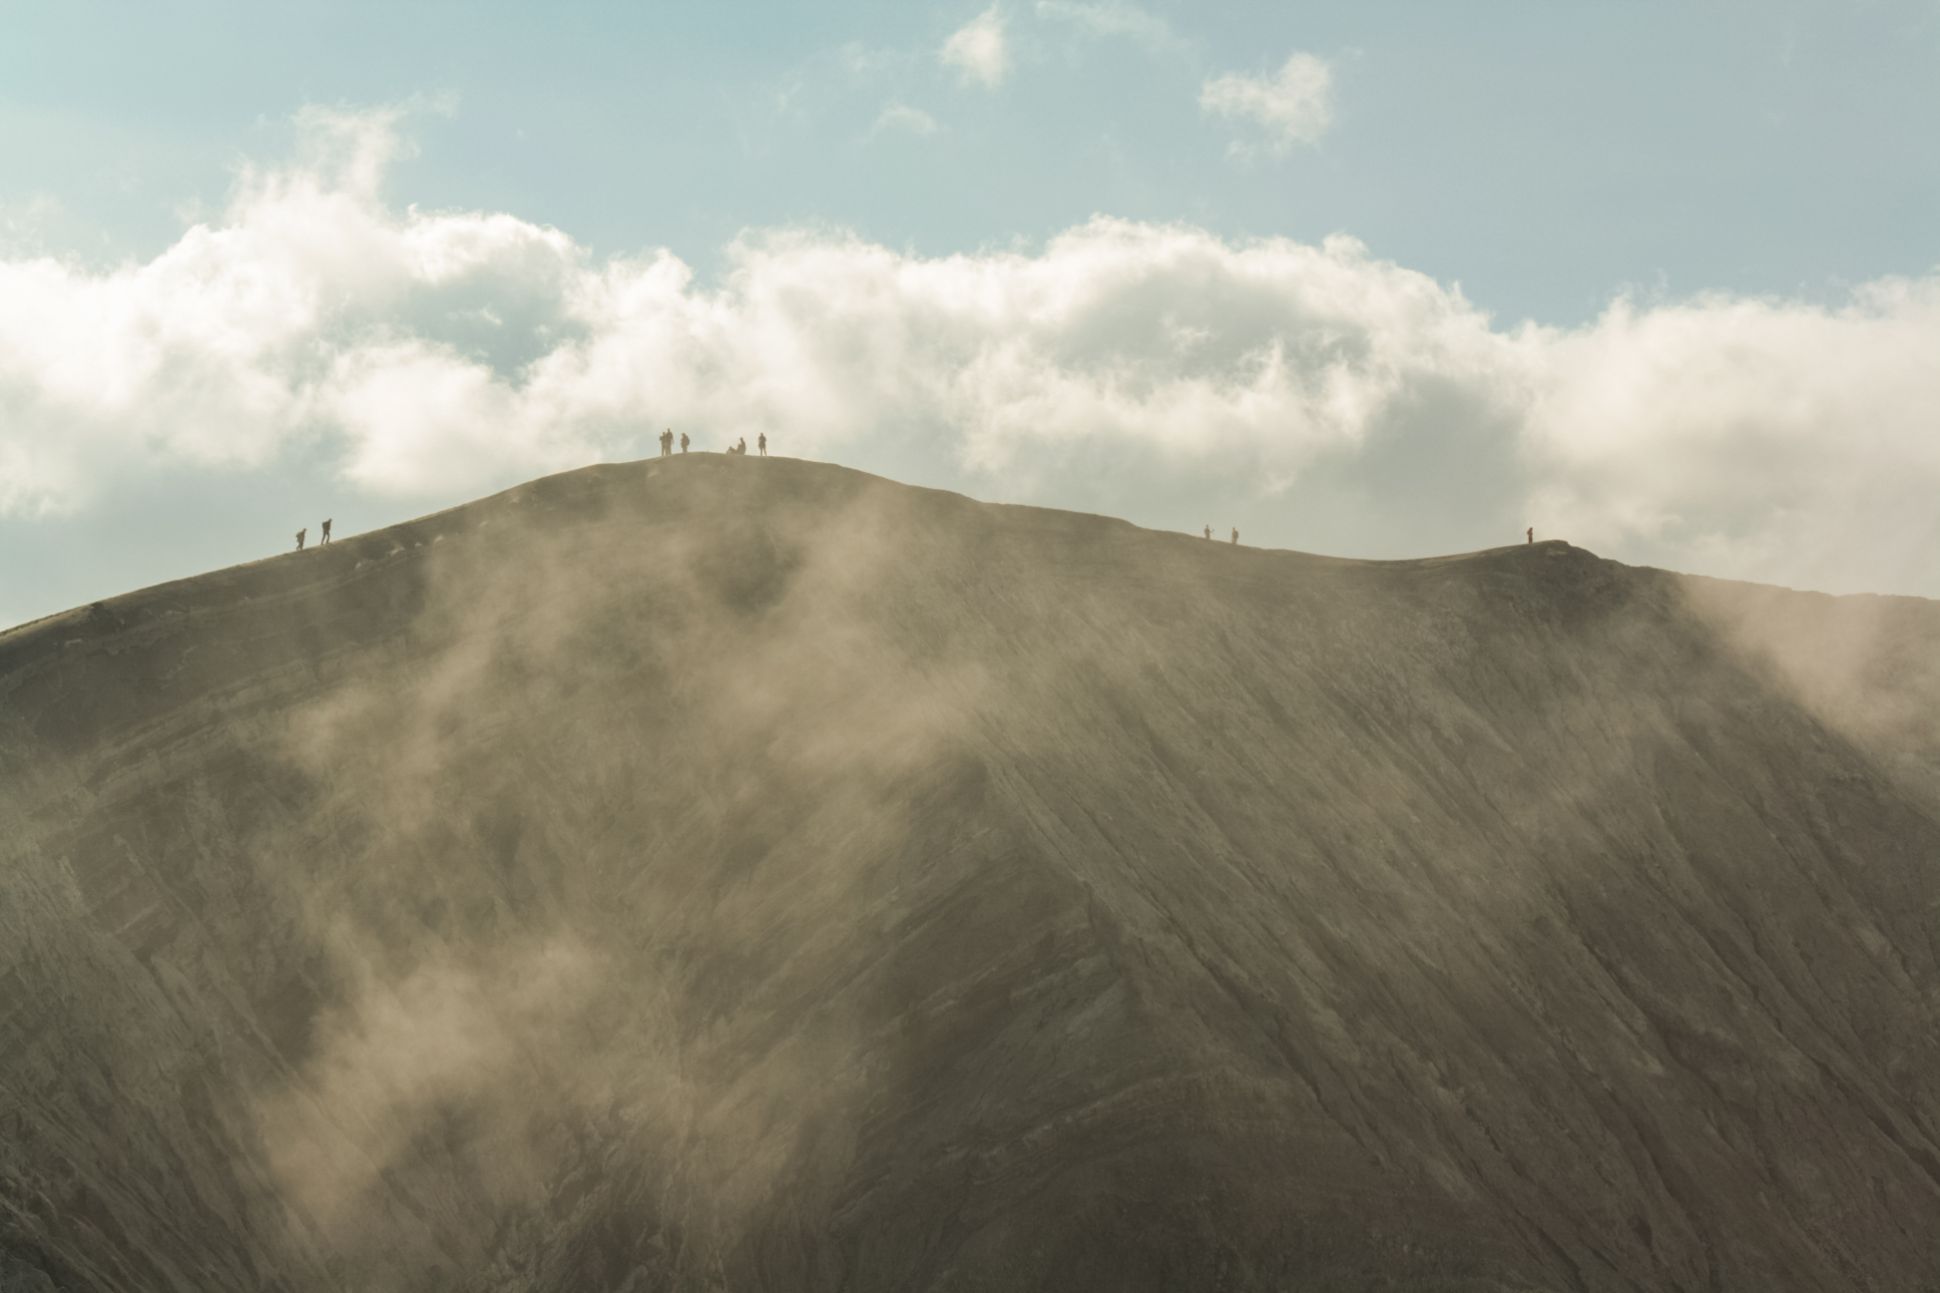 People at the top of a mountain among the clouds.